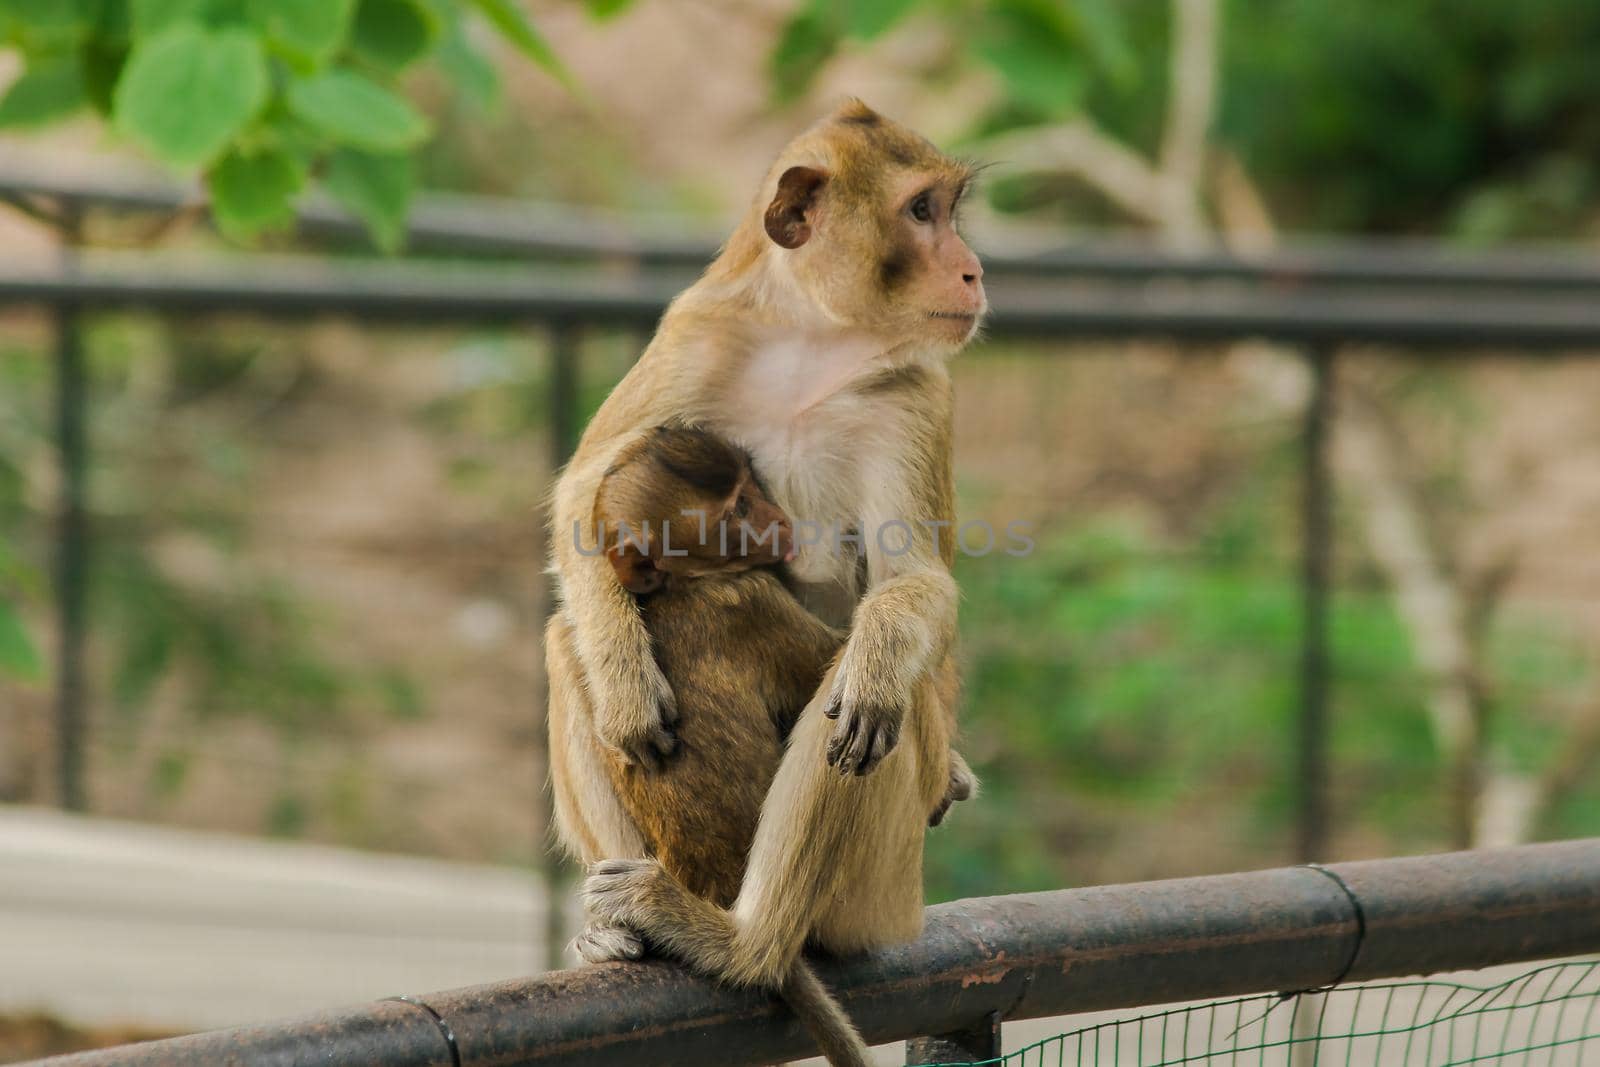 The baby monkeys feed on the milk from the sitting mother. by Puripatt